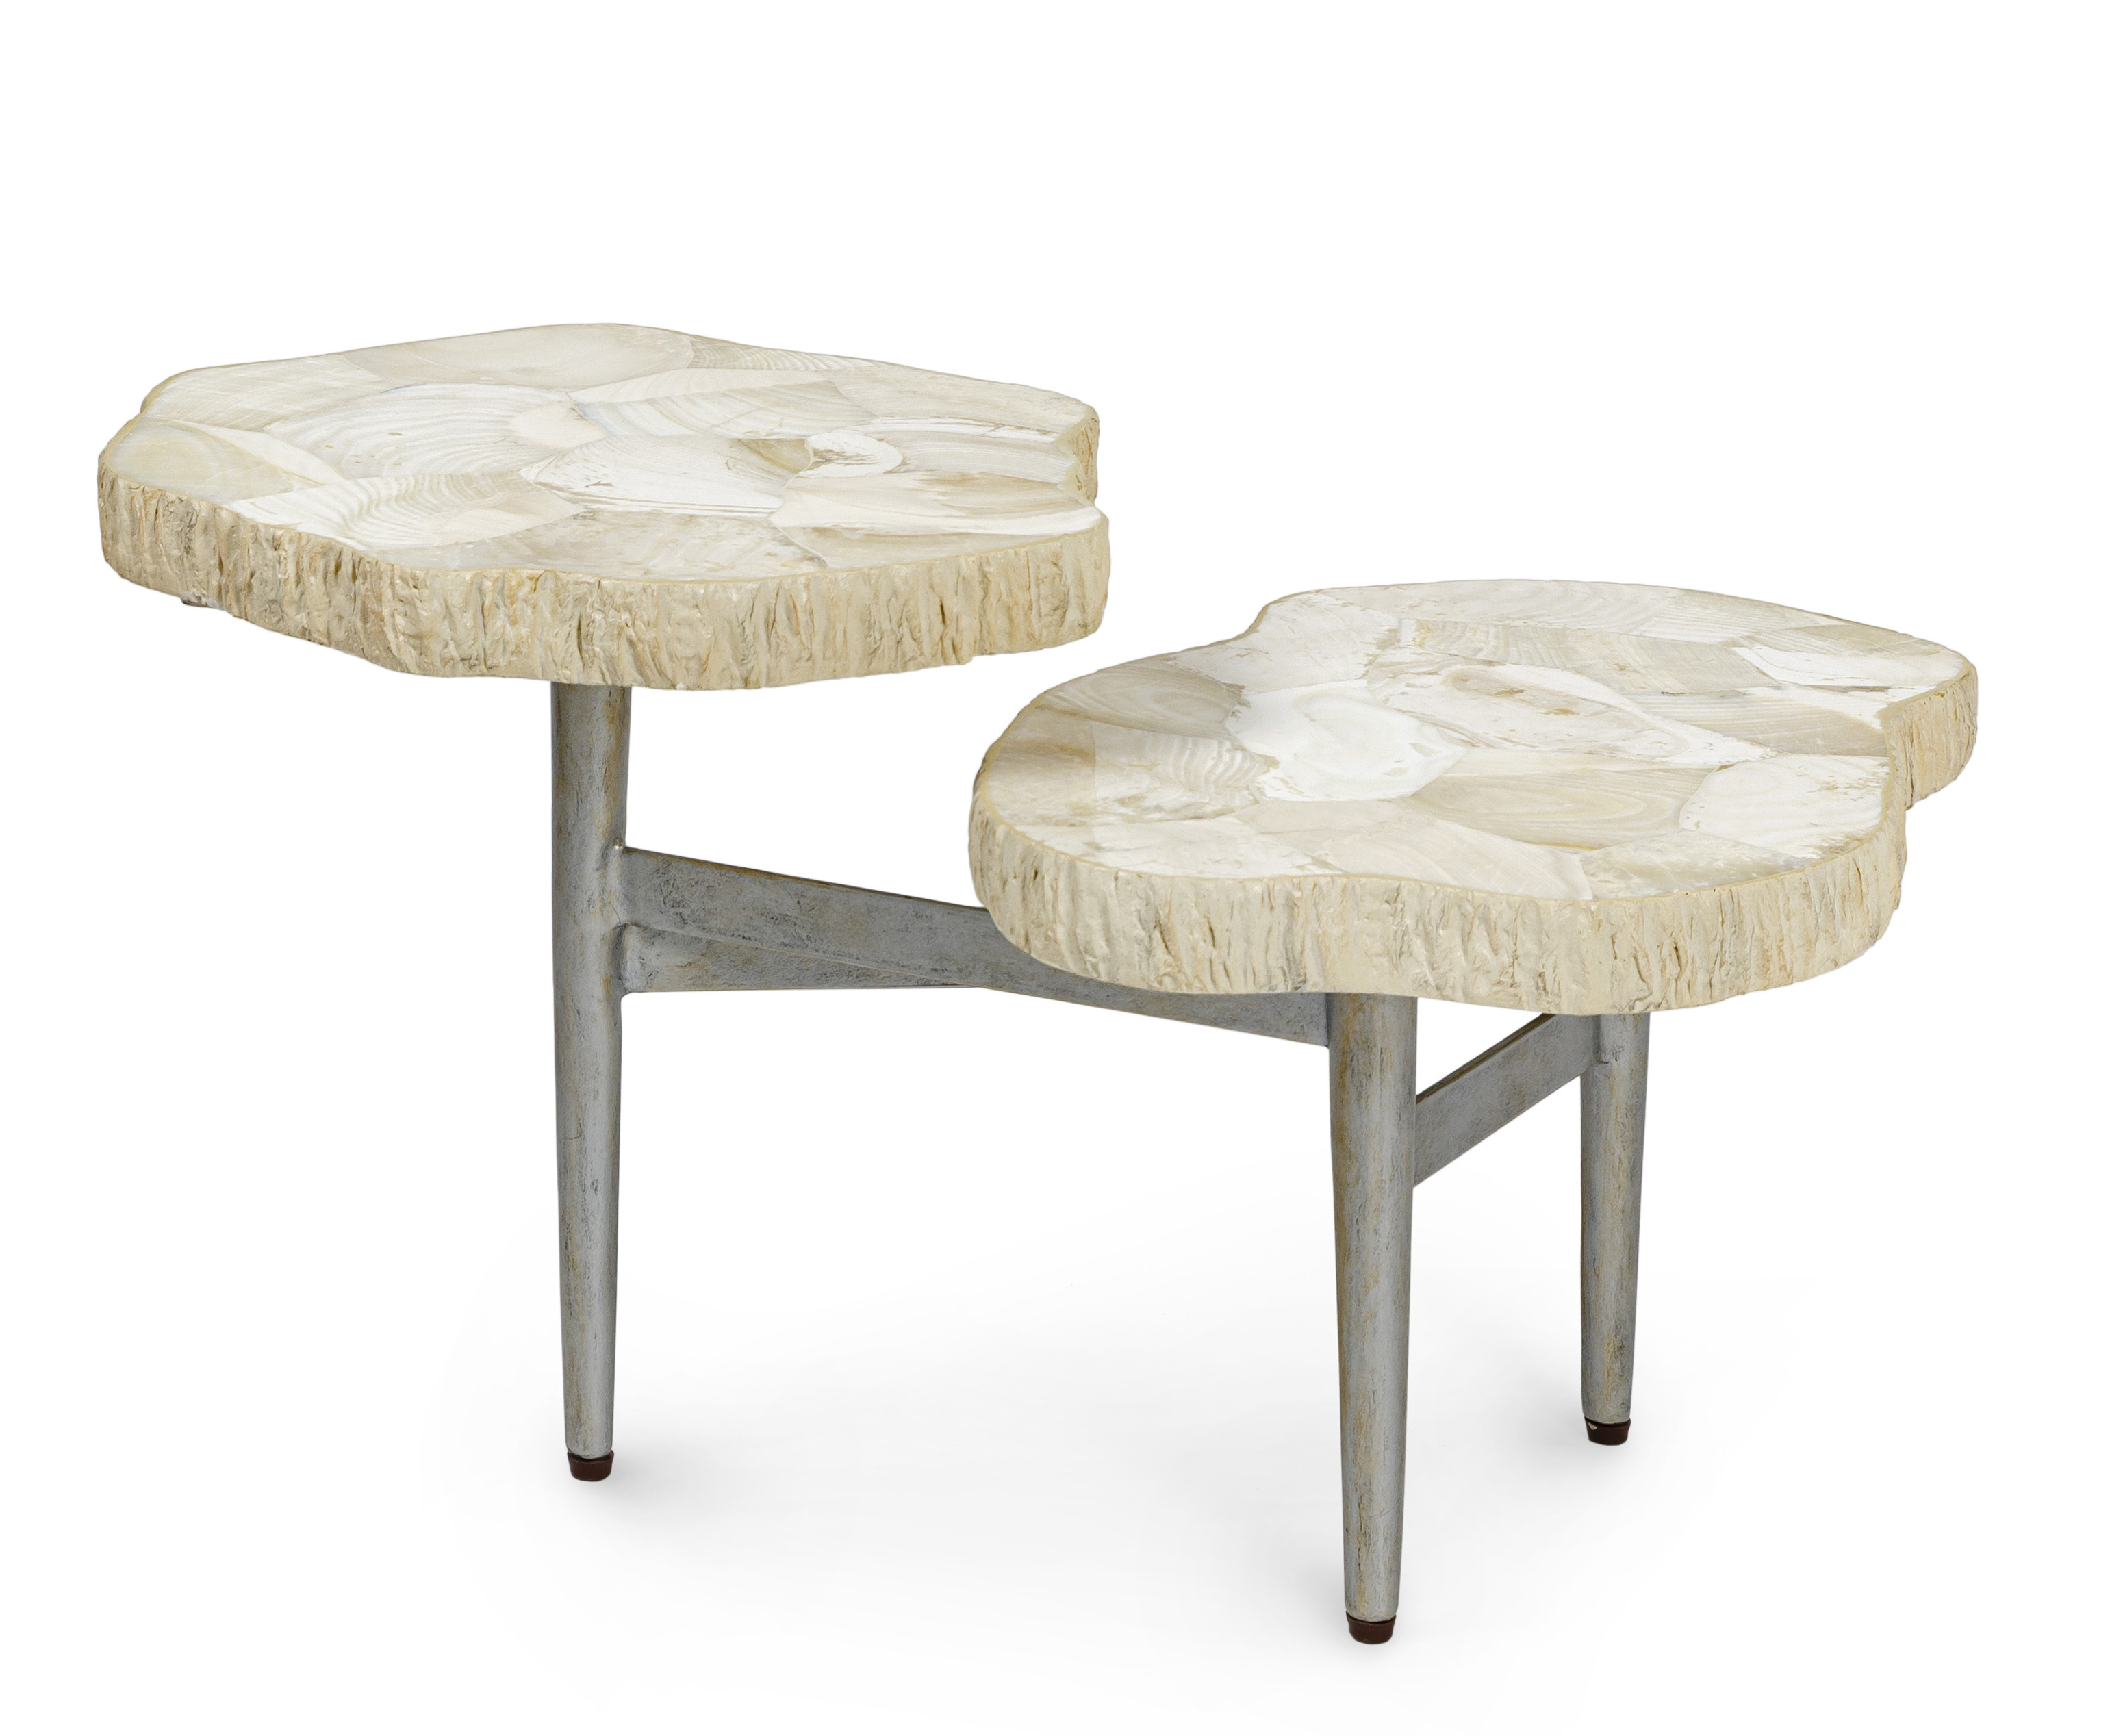 tables Cocktail & 2 cocktail : Inlaid | Merced palecek : room Robb Stucky living Clam : end Fossilized Table & Top